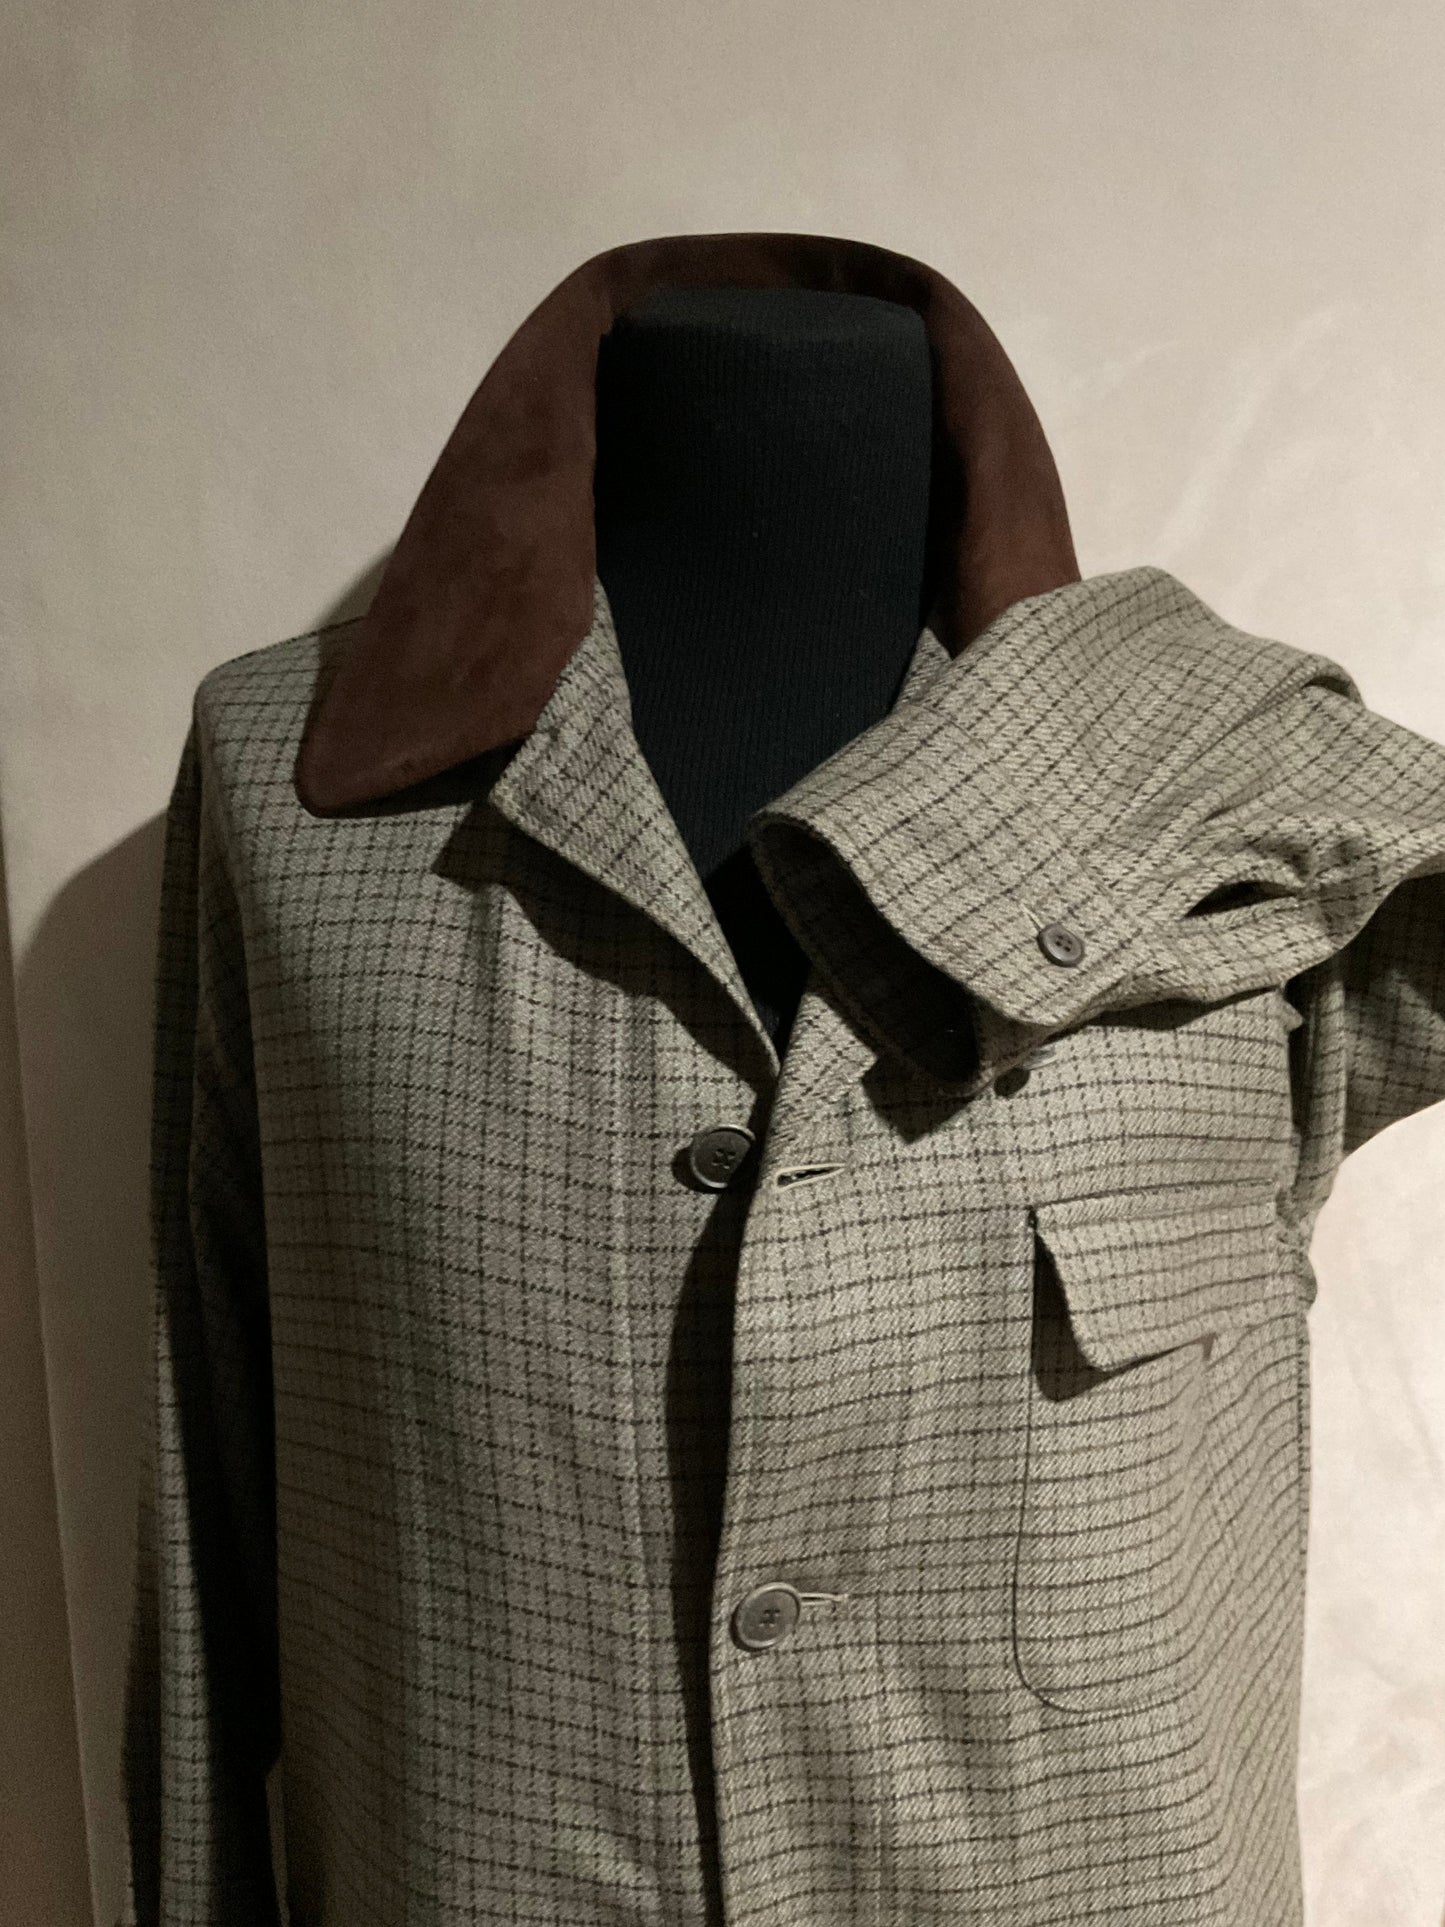 R P ENGLISH COUNTRY JACKET / OLIVE CHECK / BROWN SUEDE / MEDIUM - LARGE / MADE IN USA